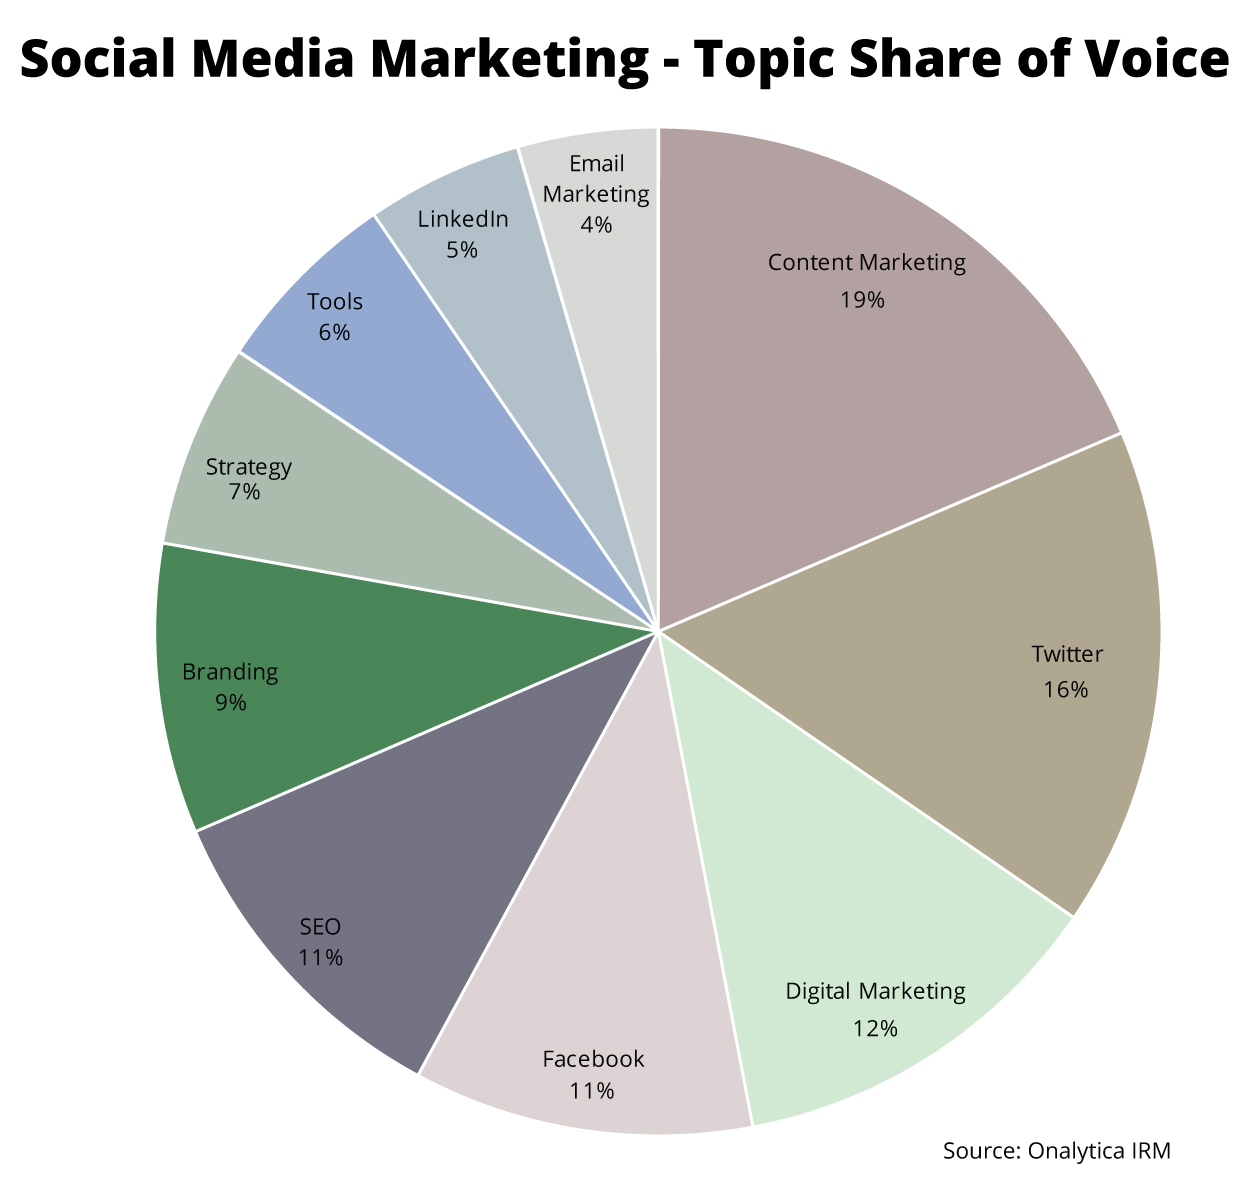 Onalytica - Social Media Marketing 2016 - Top 100 Influencers and Brands - Topic Share of Voice